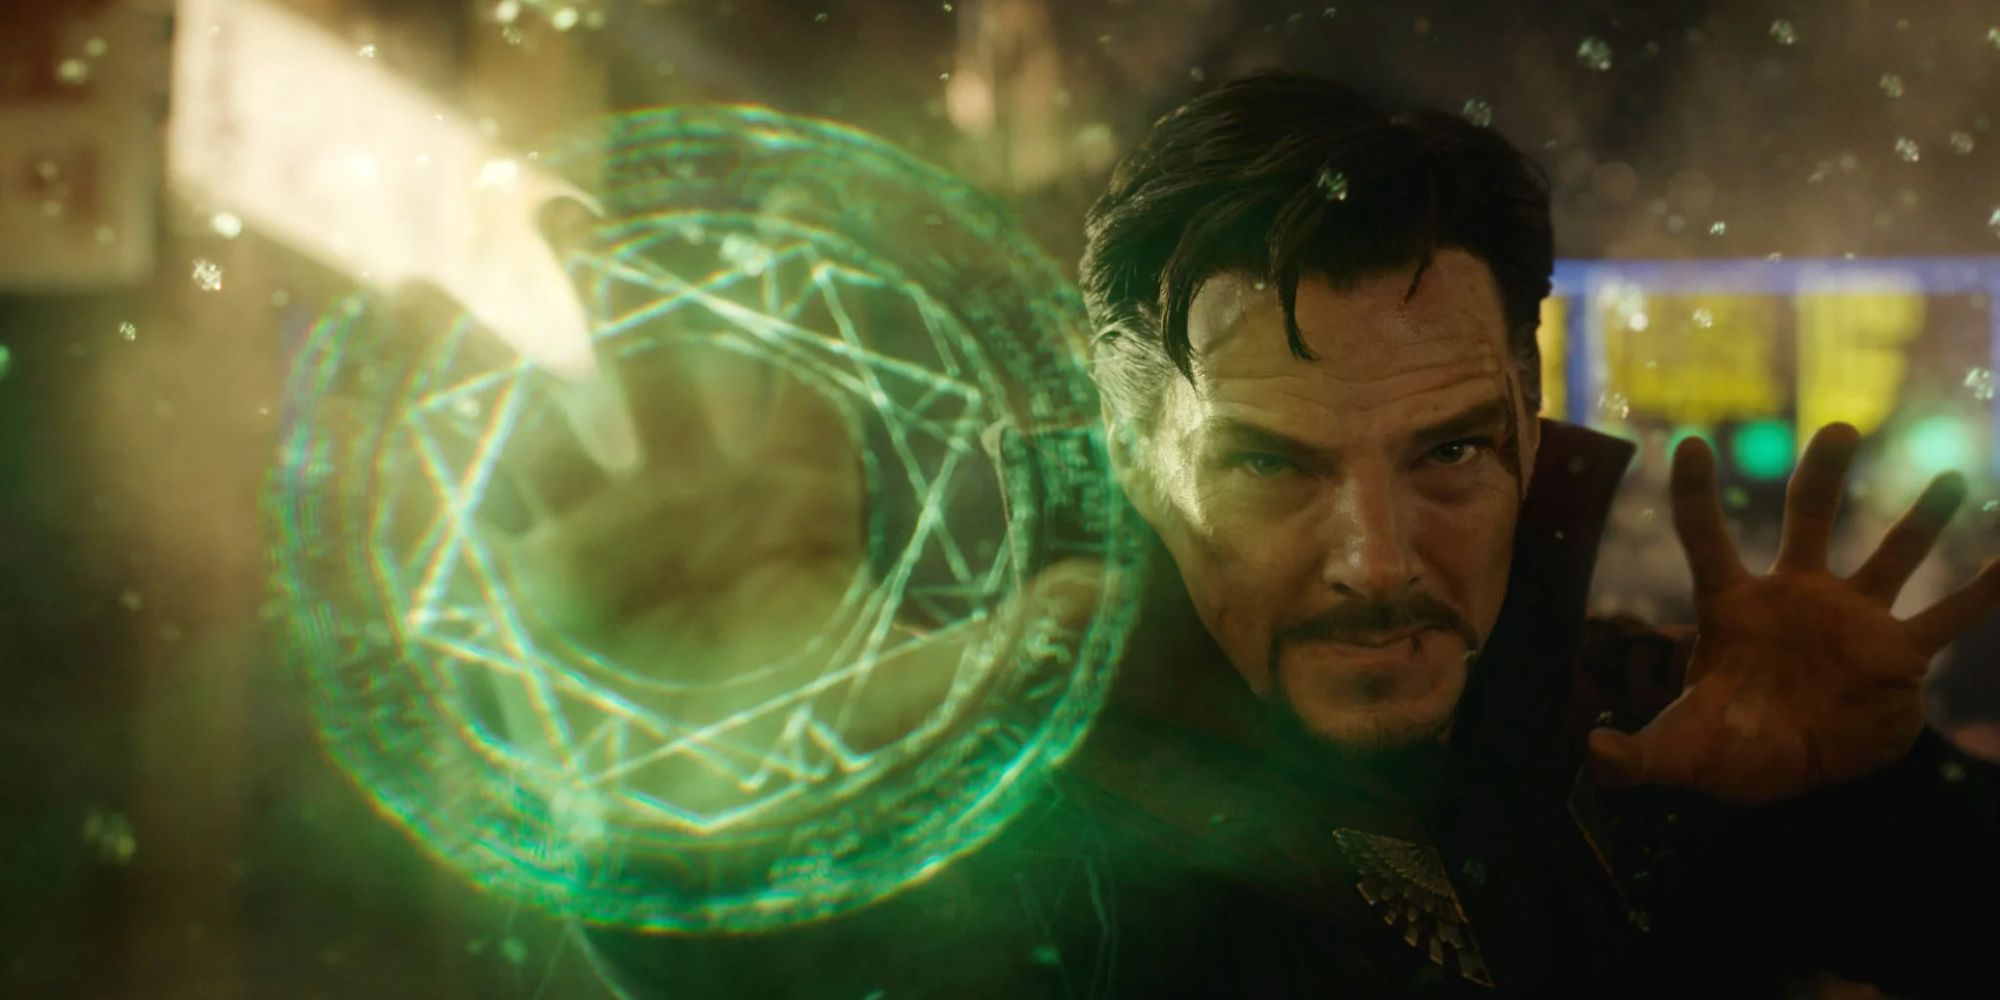 Dr. Strange using the Time Stone in the MCU